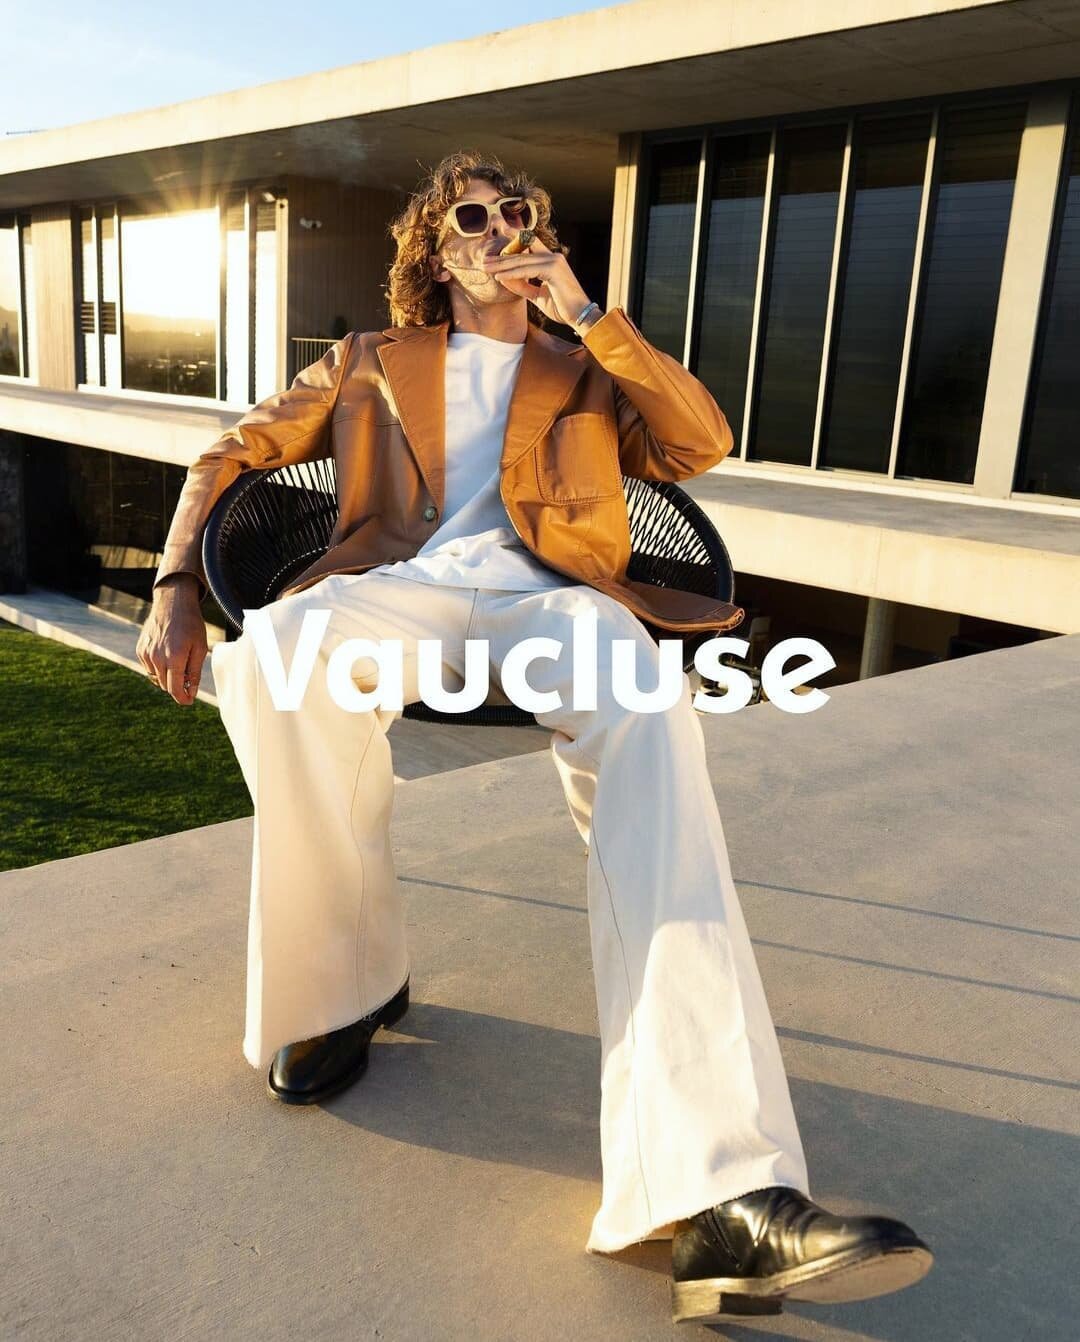 We had the pleasure of shooting the SS21 campaign for luxury street wear brand @vauclusestudios 

Enjoy ☺️

Photographer: @hazealieu 
Model: @thornependleton 
Styling: @brandon__vaucluse using various pieces from @incu_clothing 
Creative Direction: @